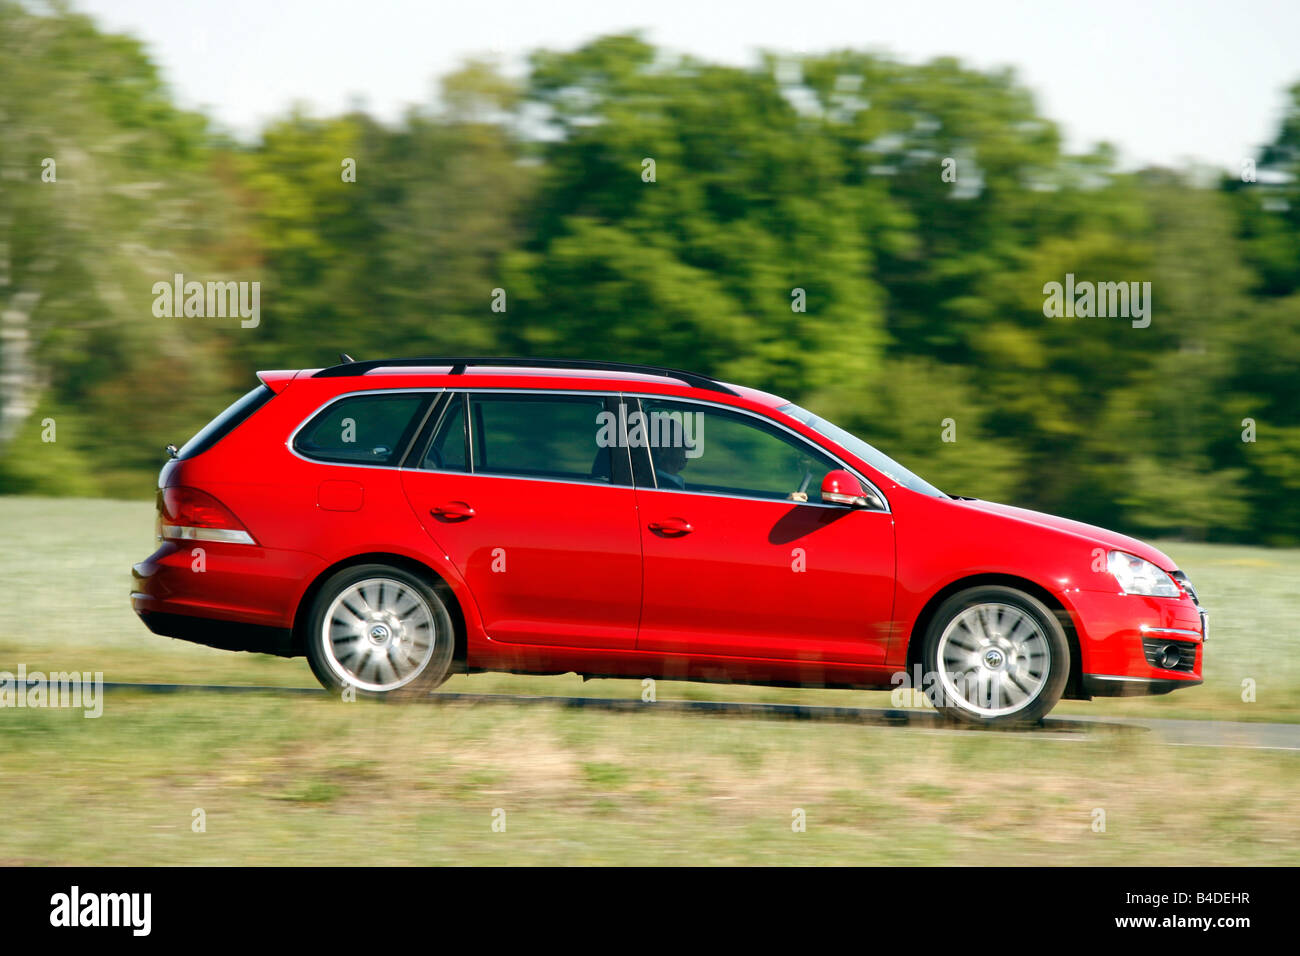 Vw Volkswagen Golf Variant 1 4 Tsi High Resolution Stock Photography and  Images - Alamy